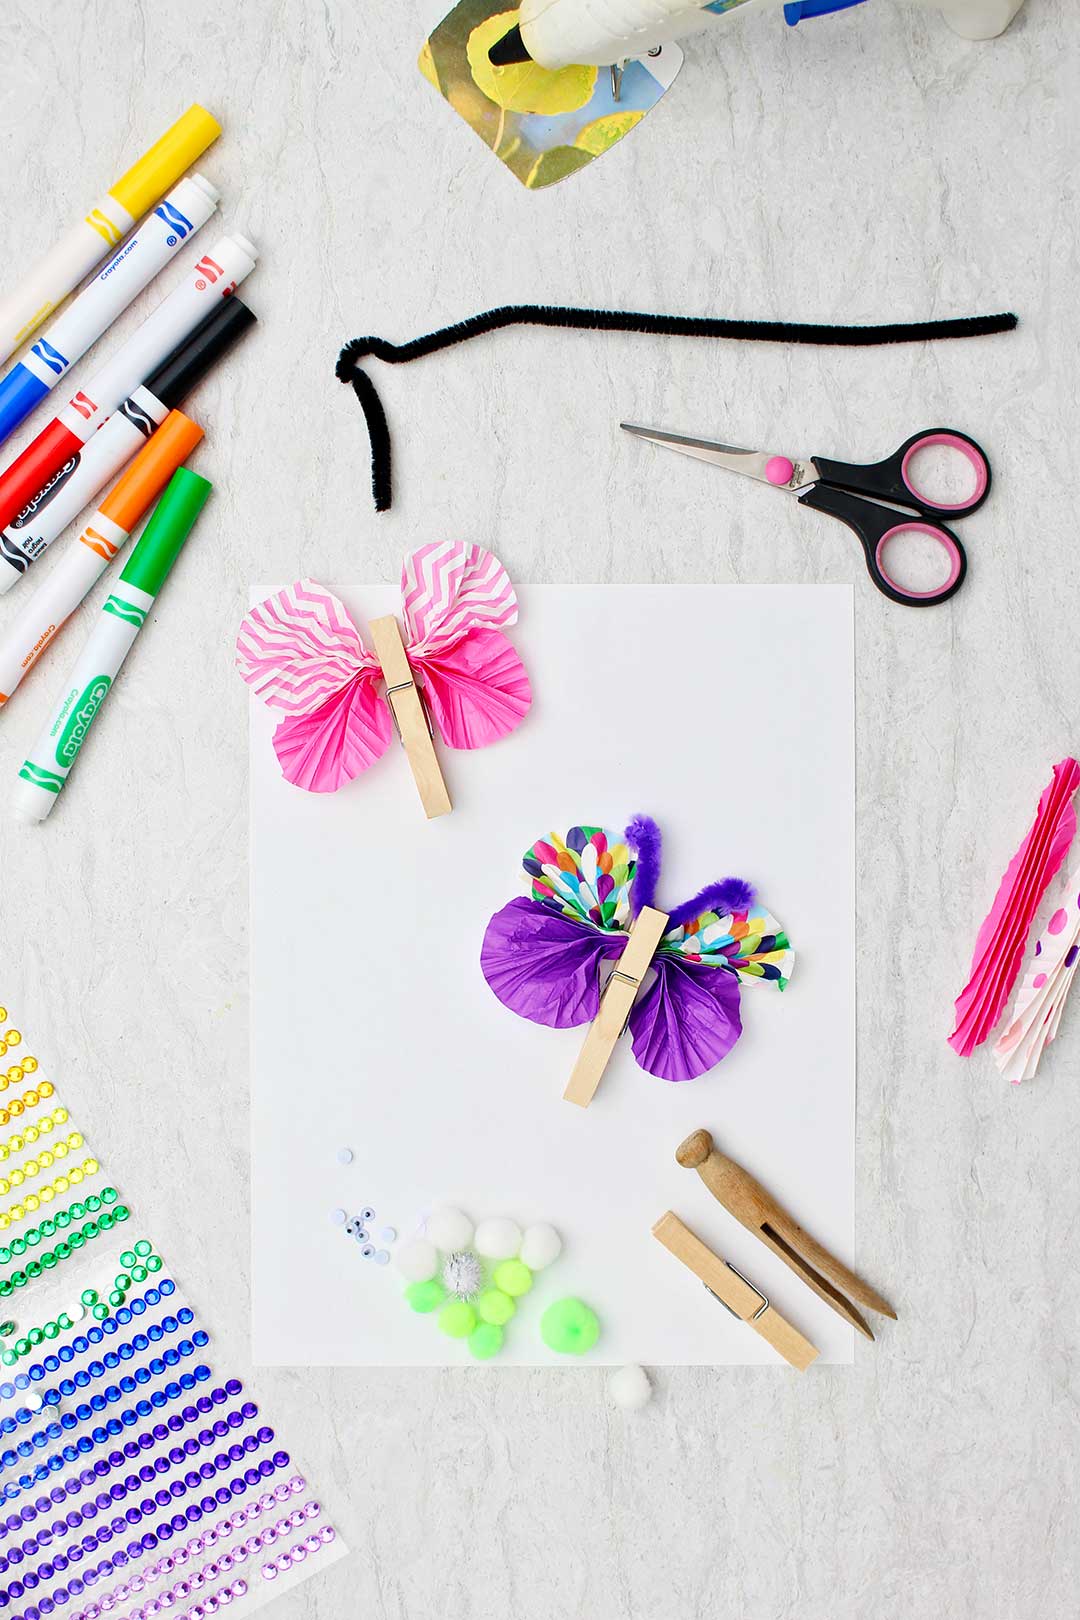 Two wooden clothespins clipping colorful paper wings sitting on a white piece of paper with other crafting supplies near by.